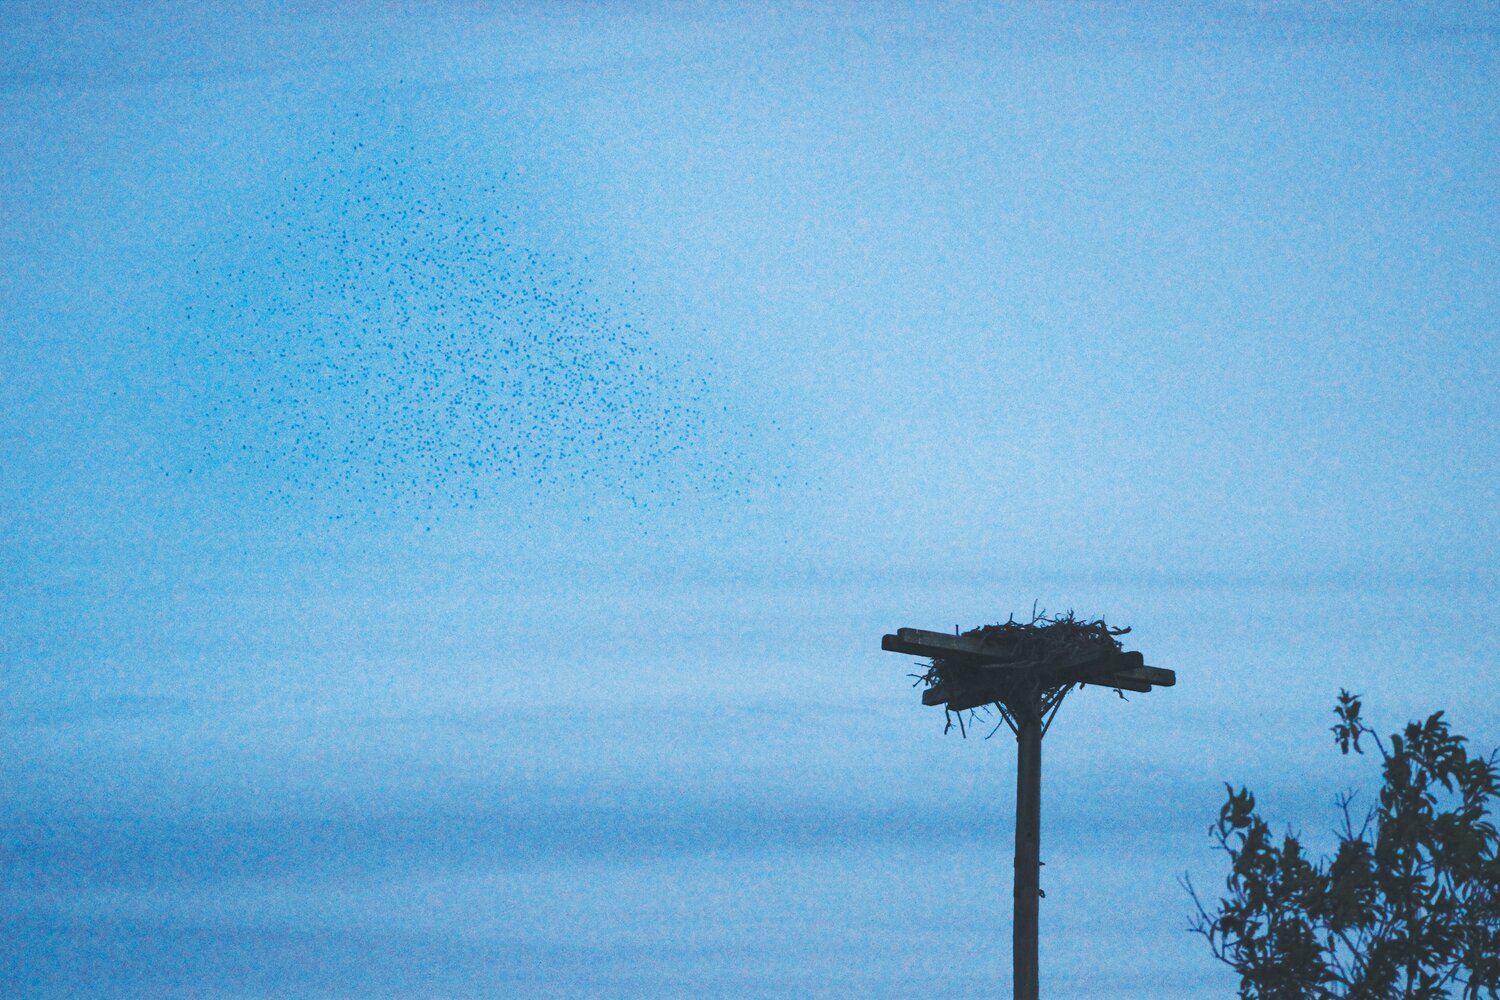 A murmuration of swallows is barely visible as black specks in the sky at dusk to the above left of the osprey nesting pole at Sanford Farm. The flocks occur at dusk and happen as the birds group together to roost for the night.